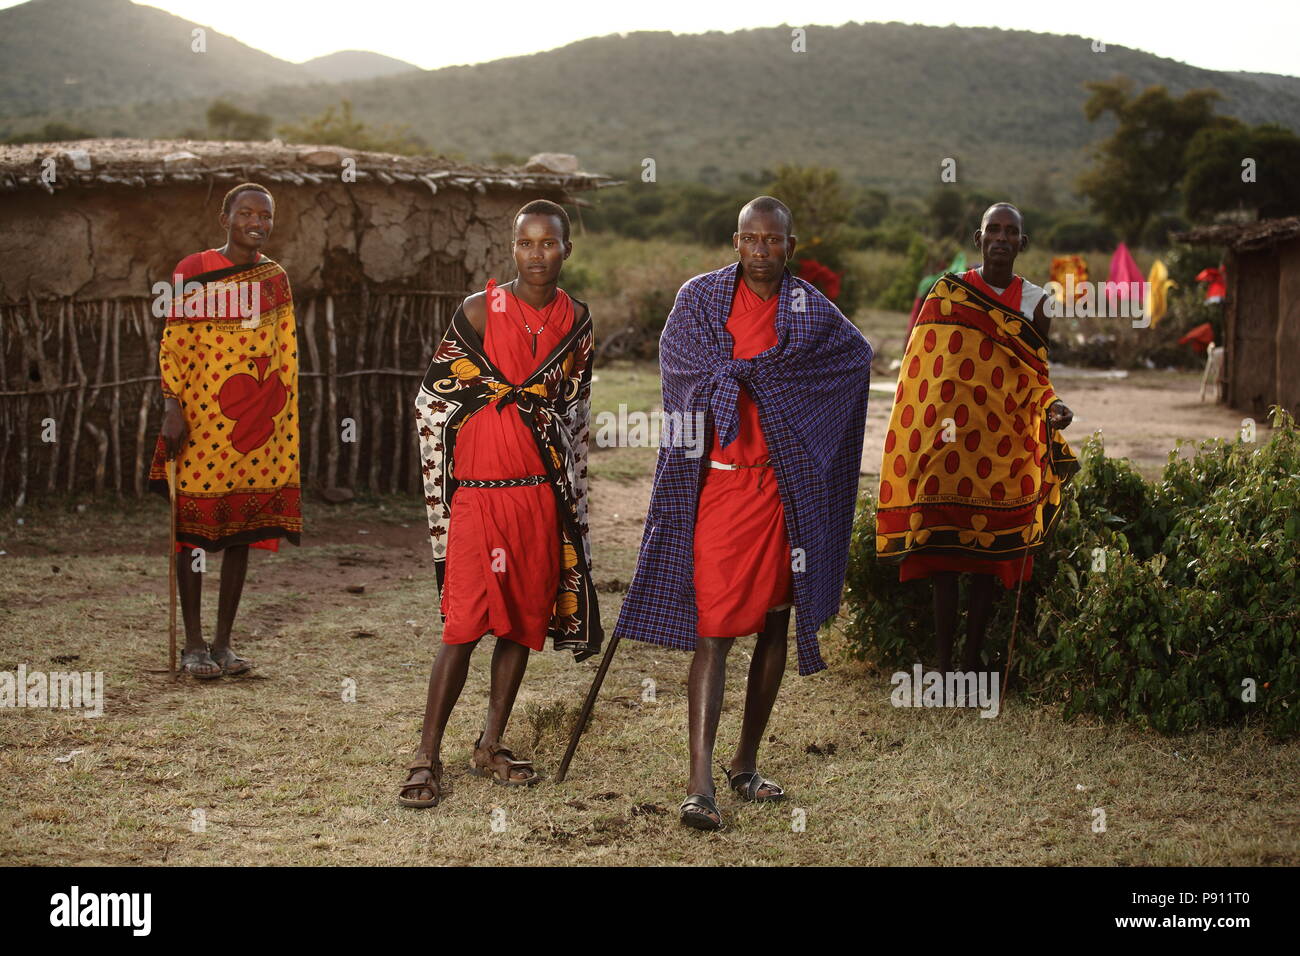 Maasai traditional men in traditional Maasai red dress smiling portrait Stock Photo